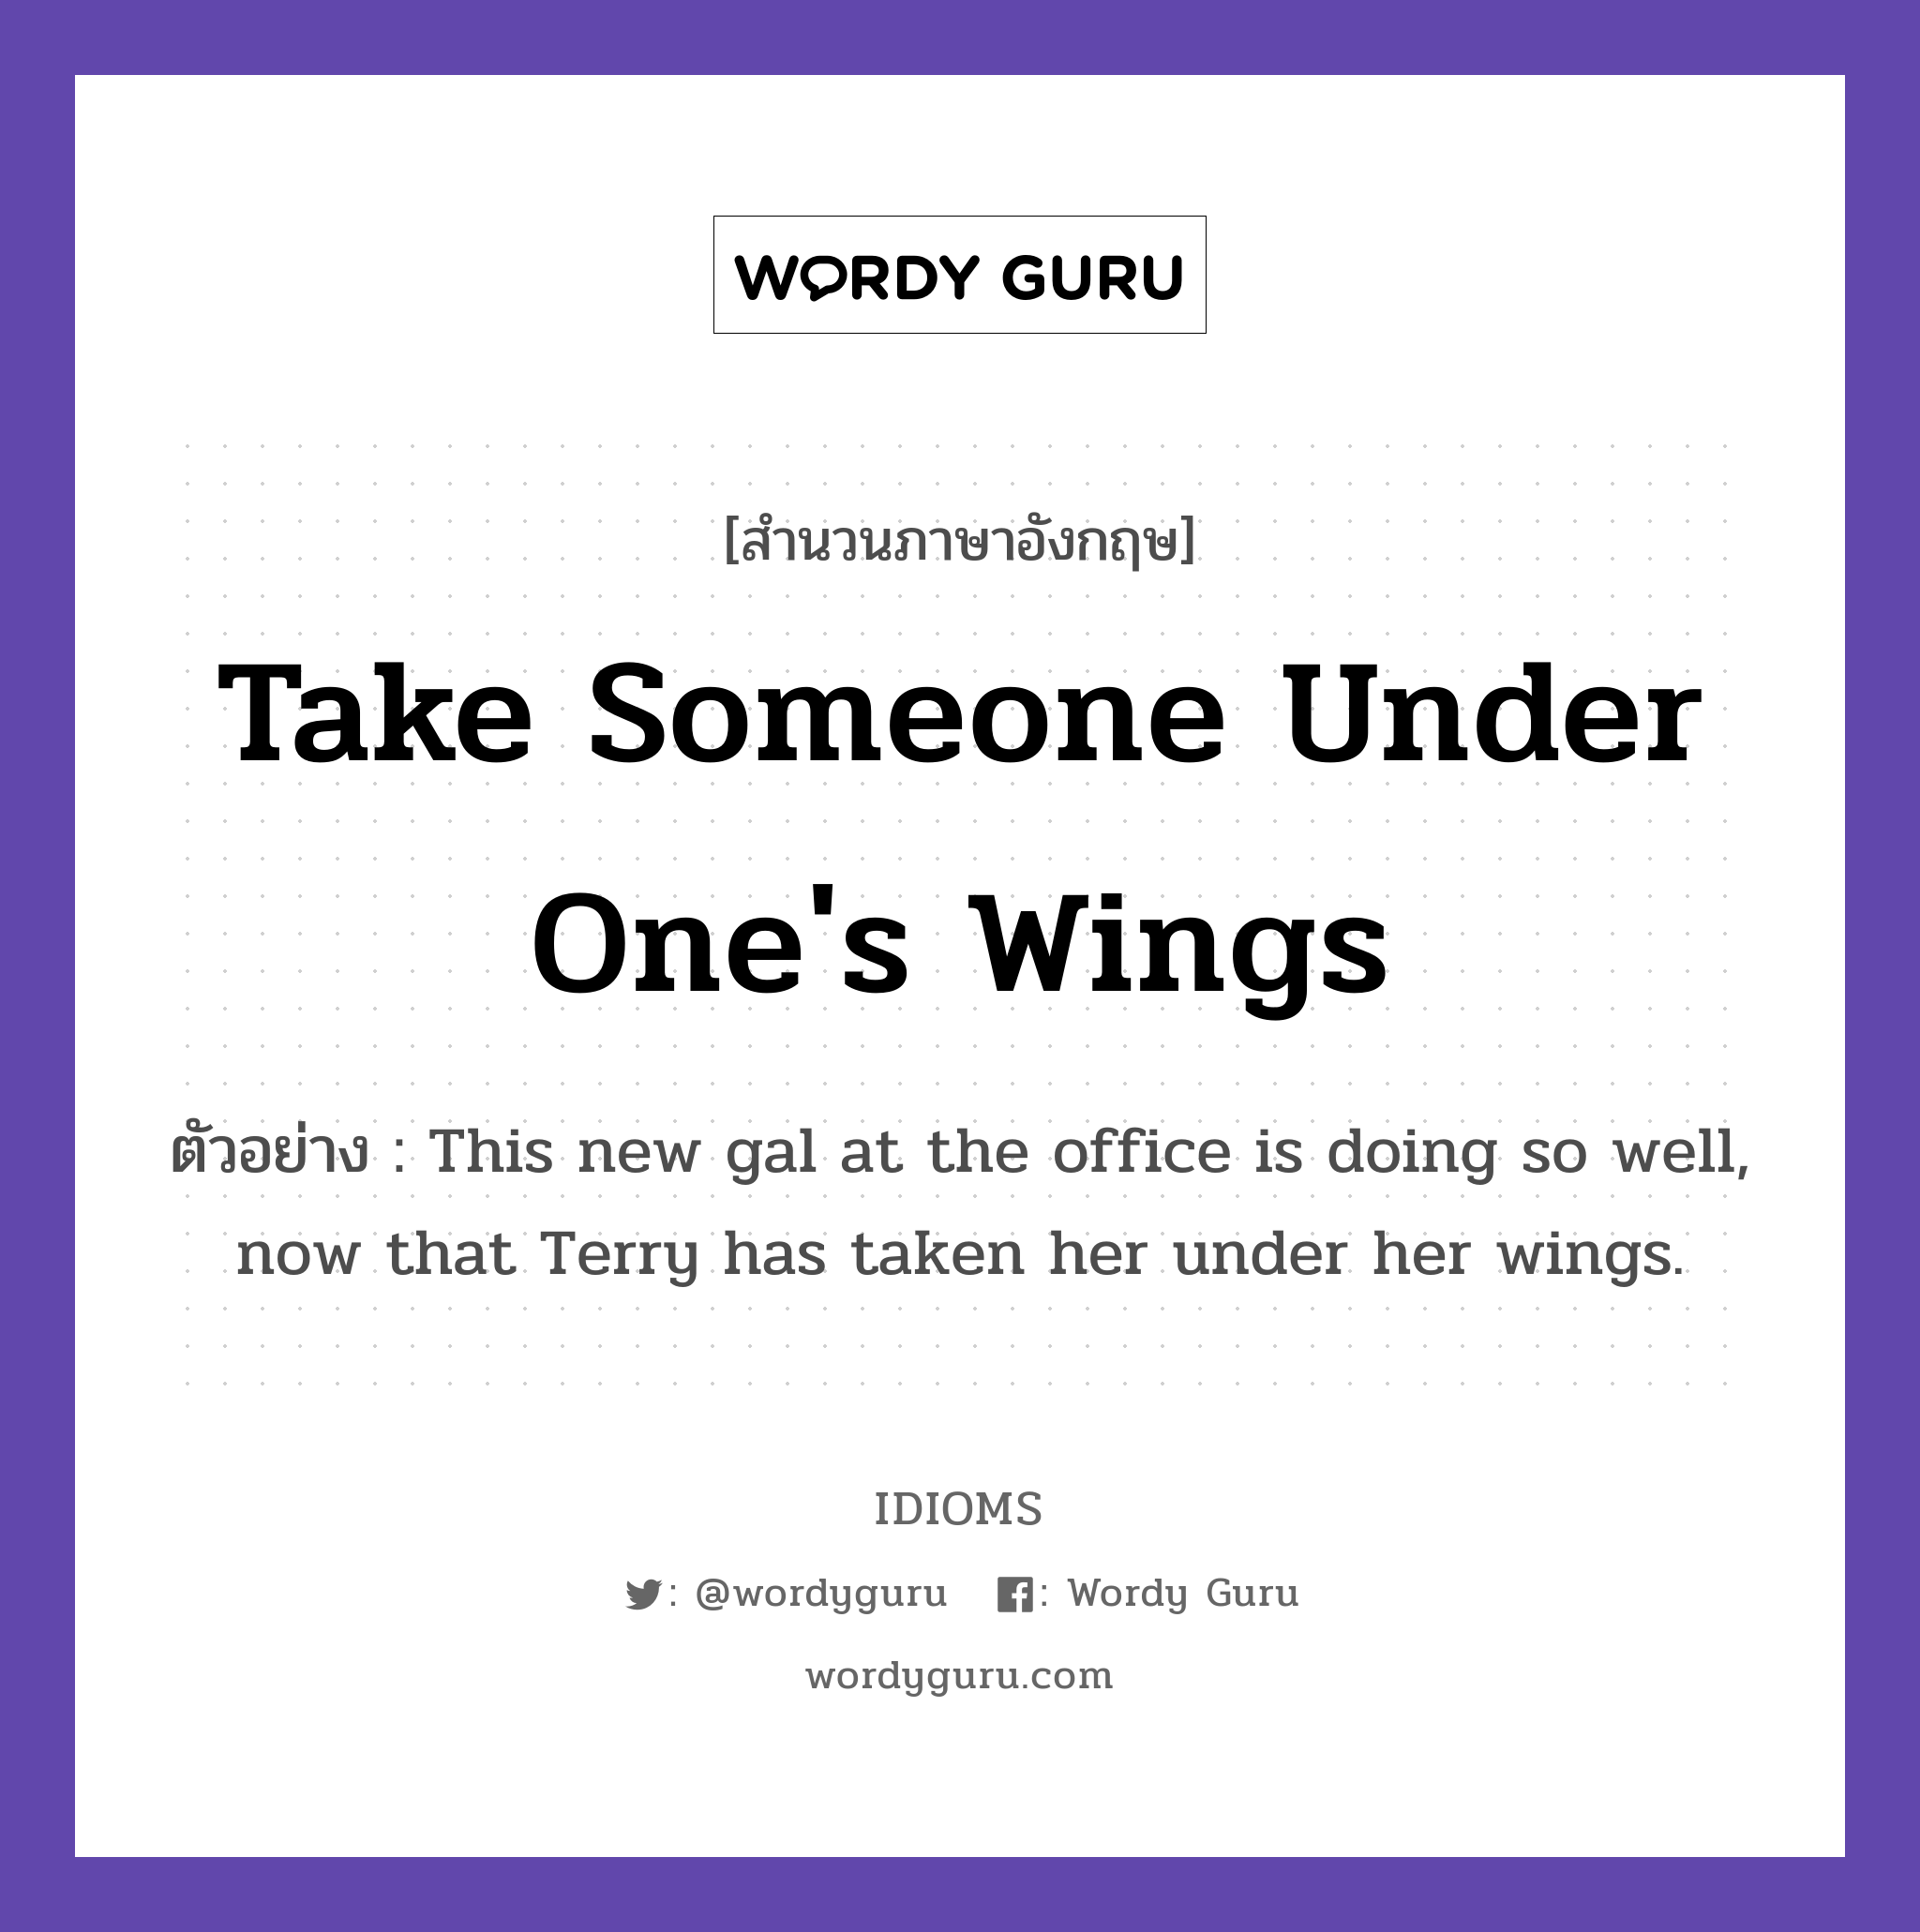 Take Someone Under One's Wings แปลว่า?, สำนวนภาษาอังกฤษ Take Someone Under One's Wings ตัวอย่าง This new gal at the office is doing so well, now that Terry has taken her under her wings.